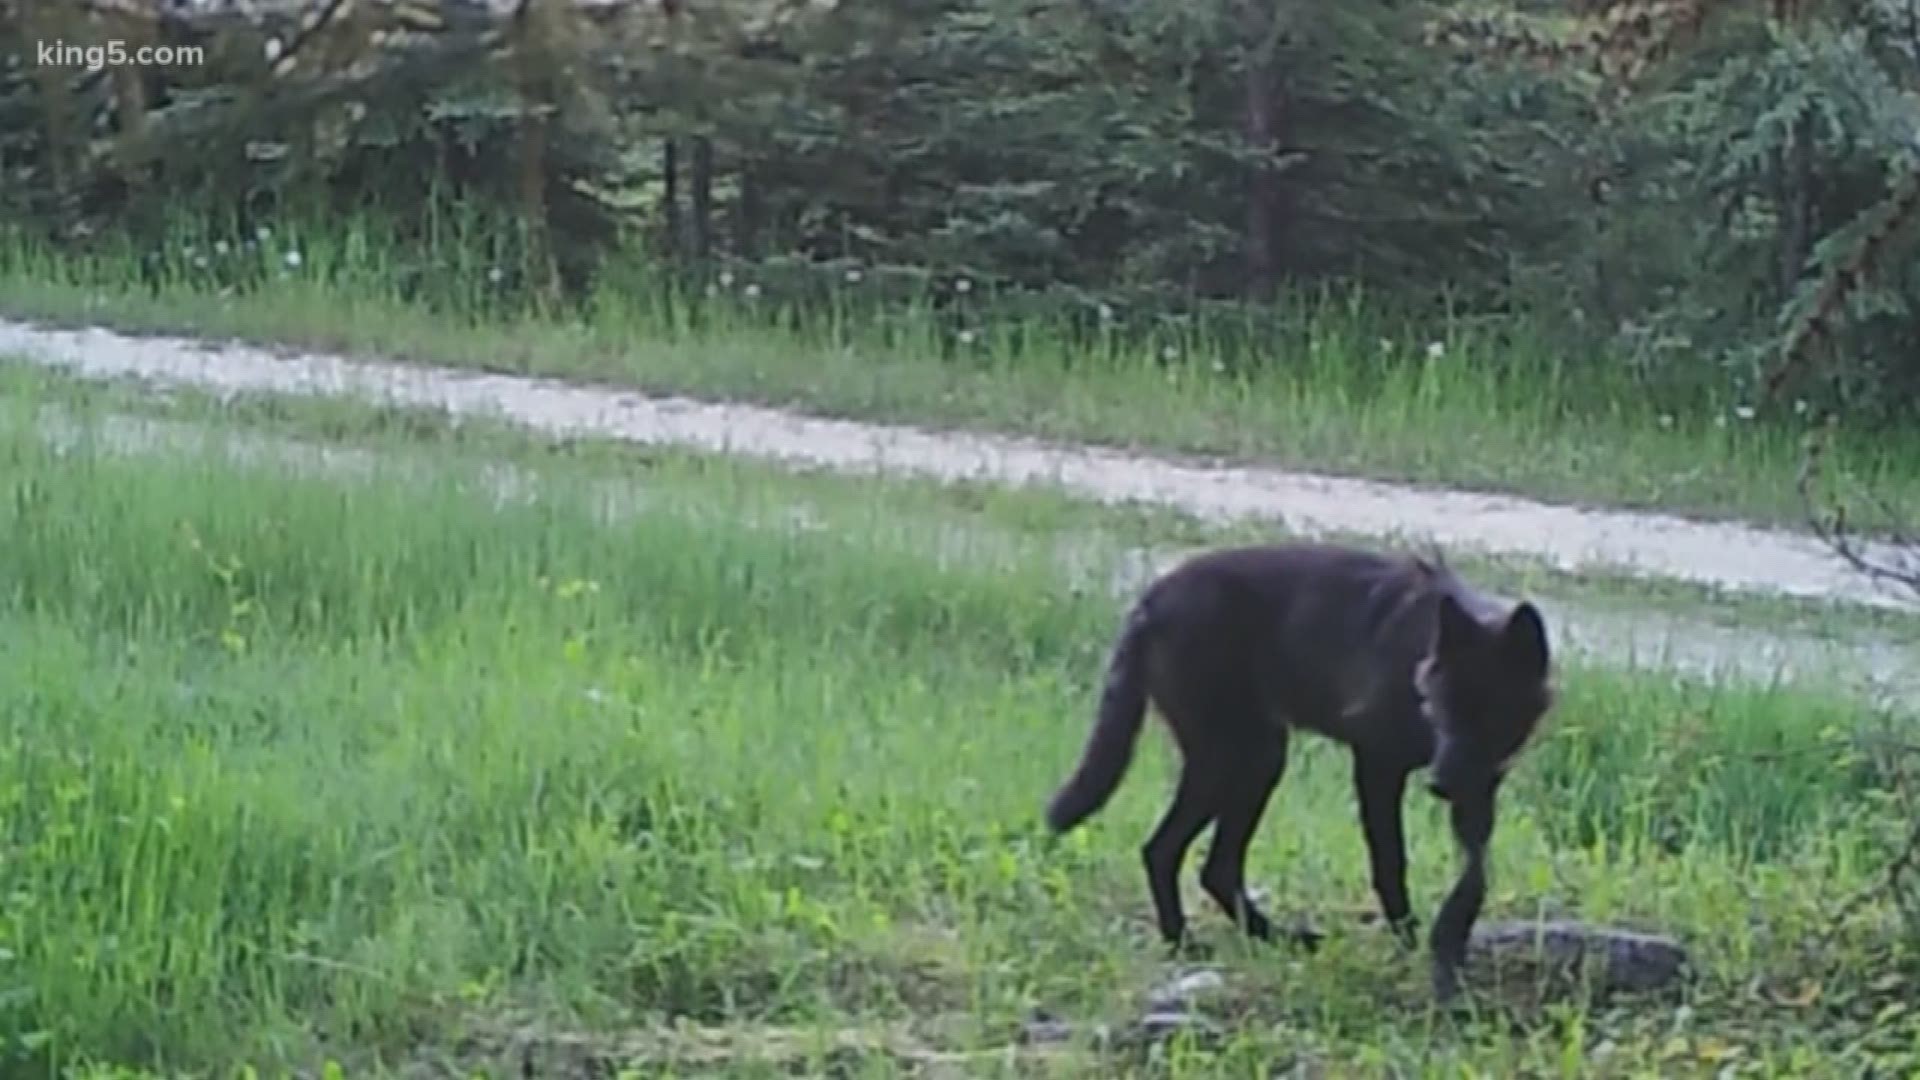 There are more wolves in Washington than experts once thought, and researchers gave an update to state senators. KING 5 Environmental Reporter Alison Morrow shows us why the news could affect wolf policy.